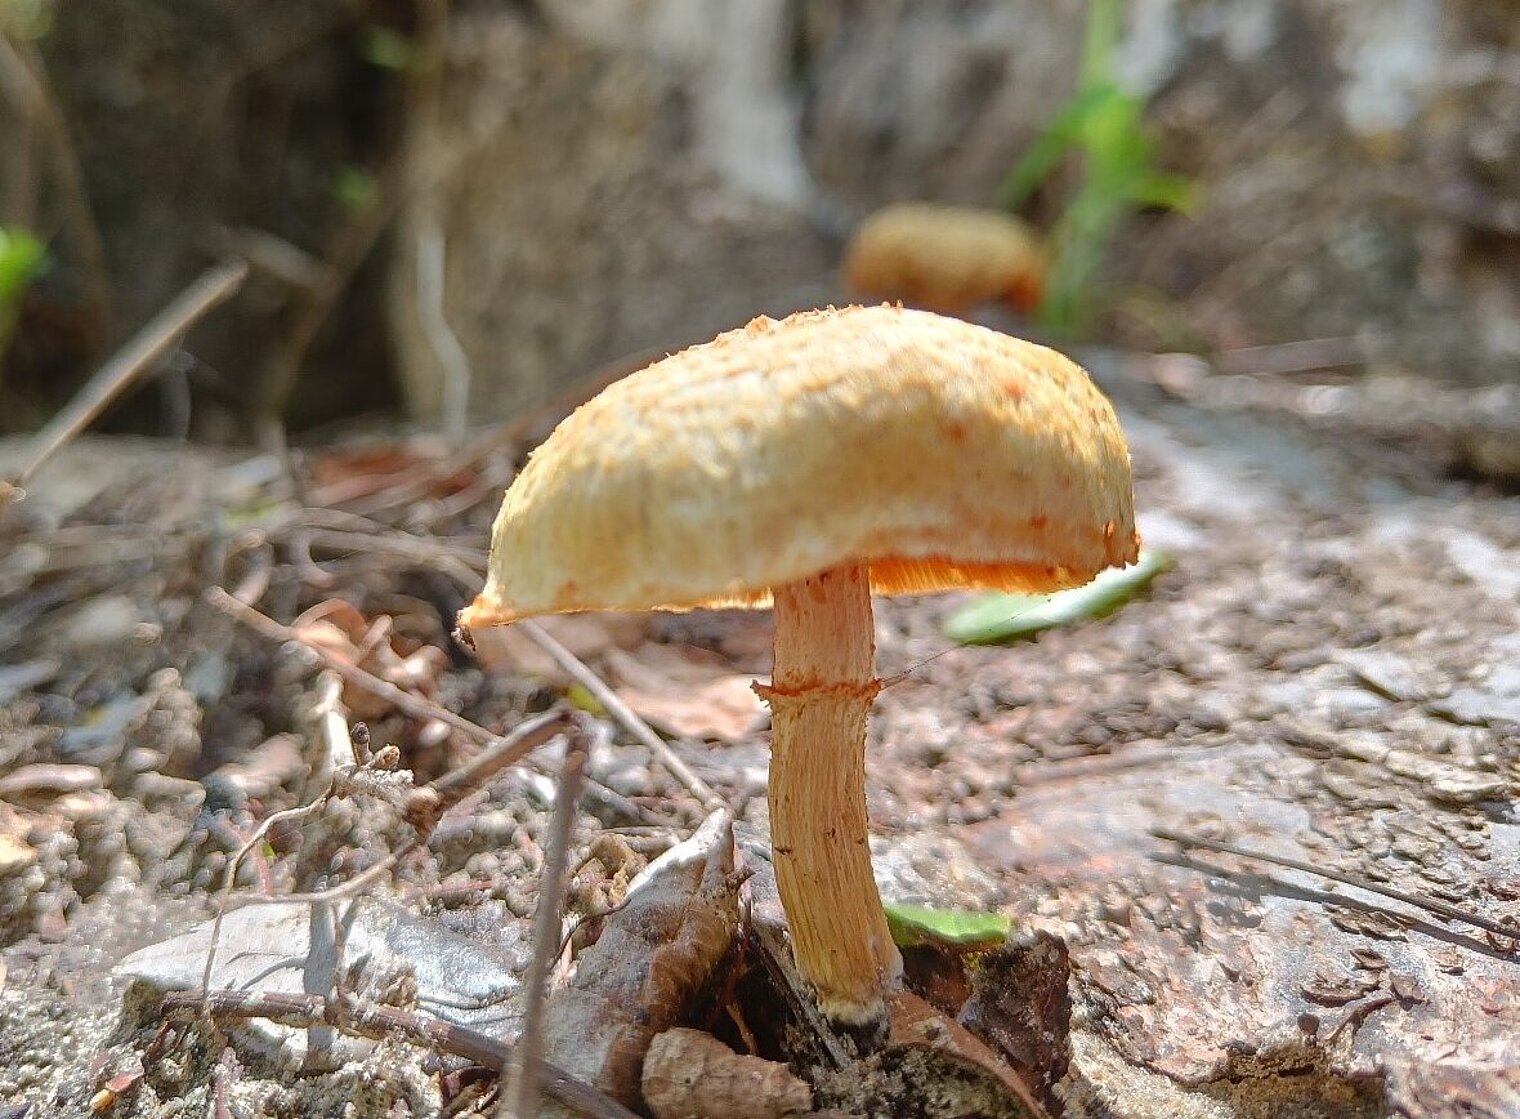 Fungus in the forest